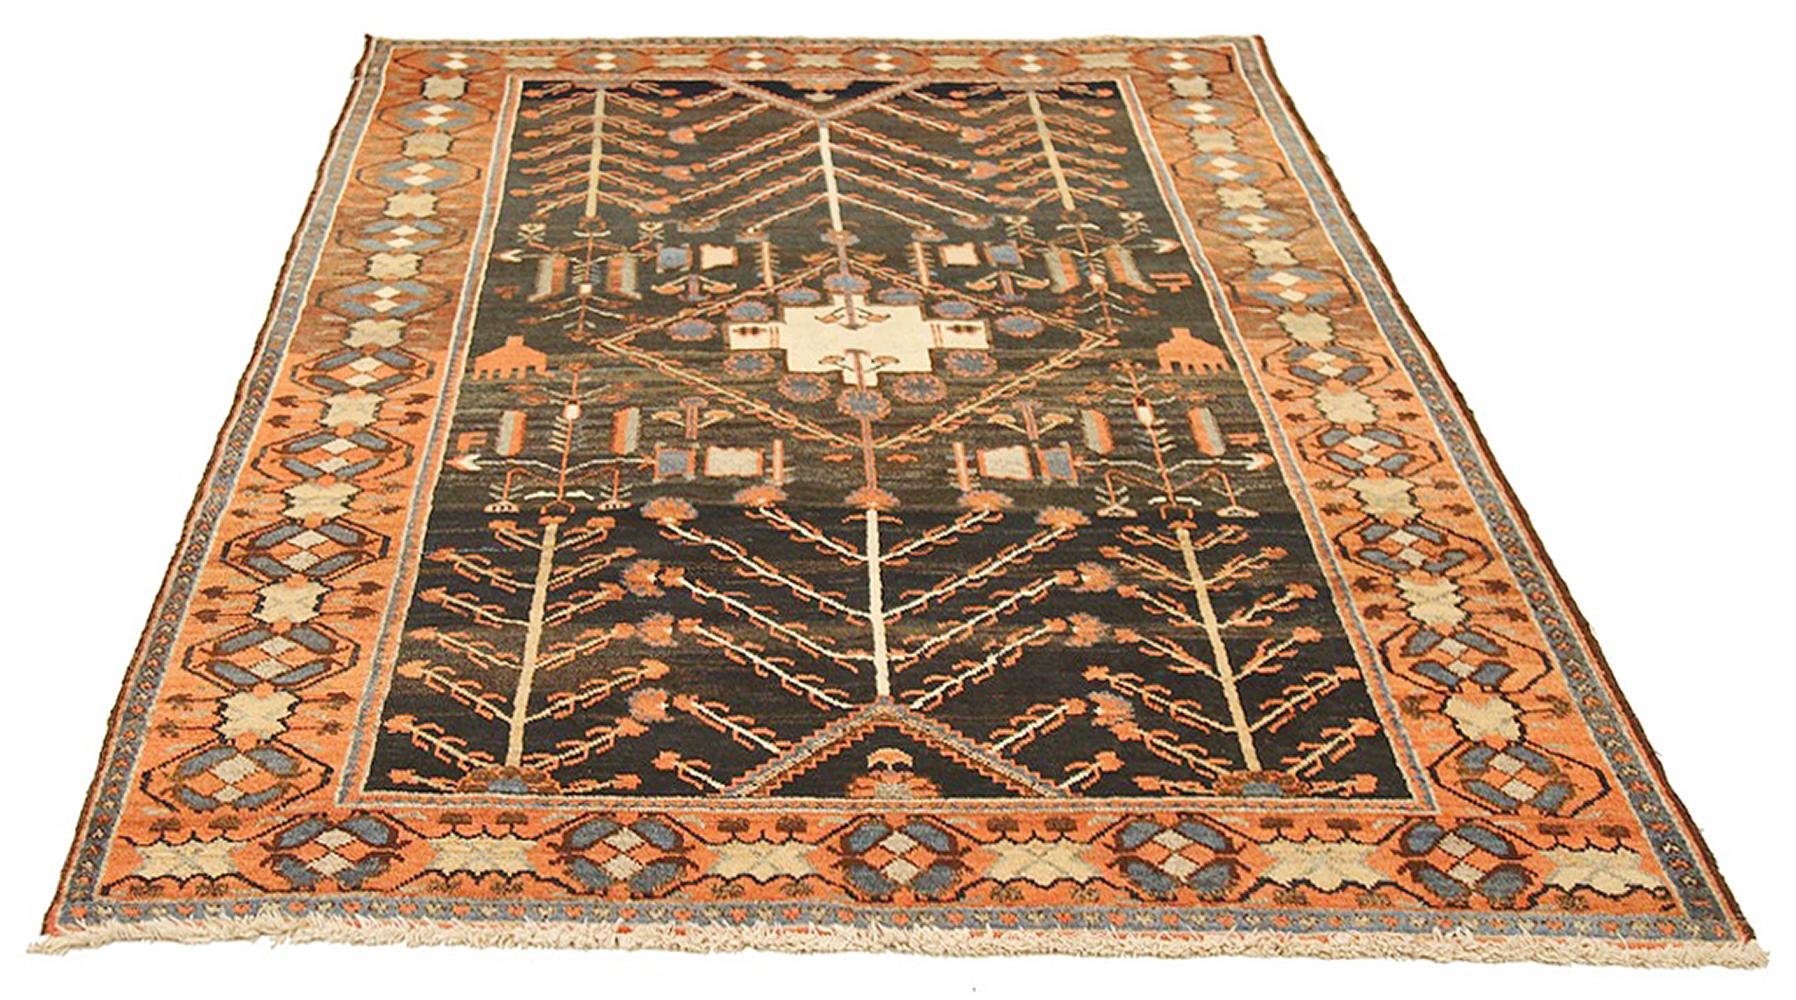 Antique Persian rug handwoven from the finest sheep’s wool and colored with all-natural vegetable dyes that are safe for humans and pets. It’s a traditional Bakhtiar design highlighted by an ivory field filled with floral details in red, green, and